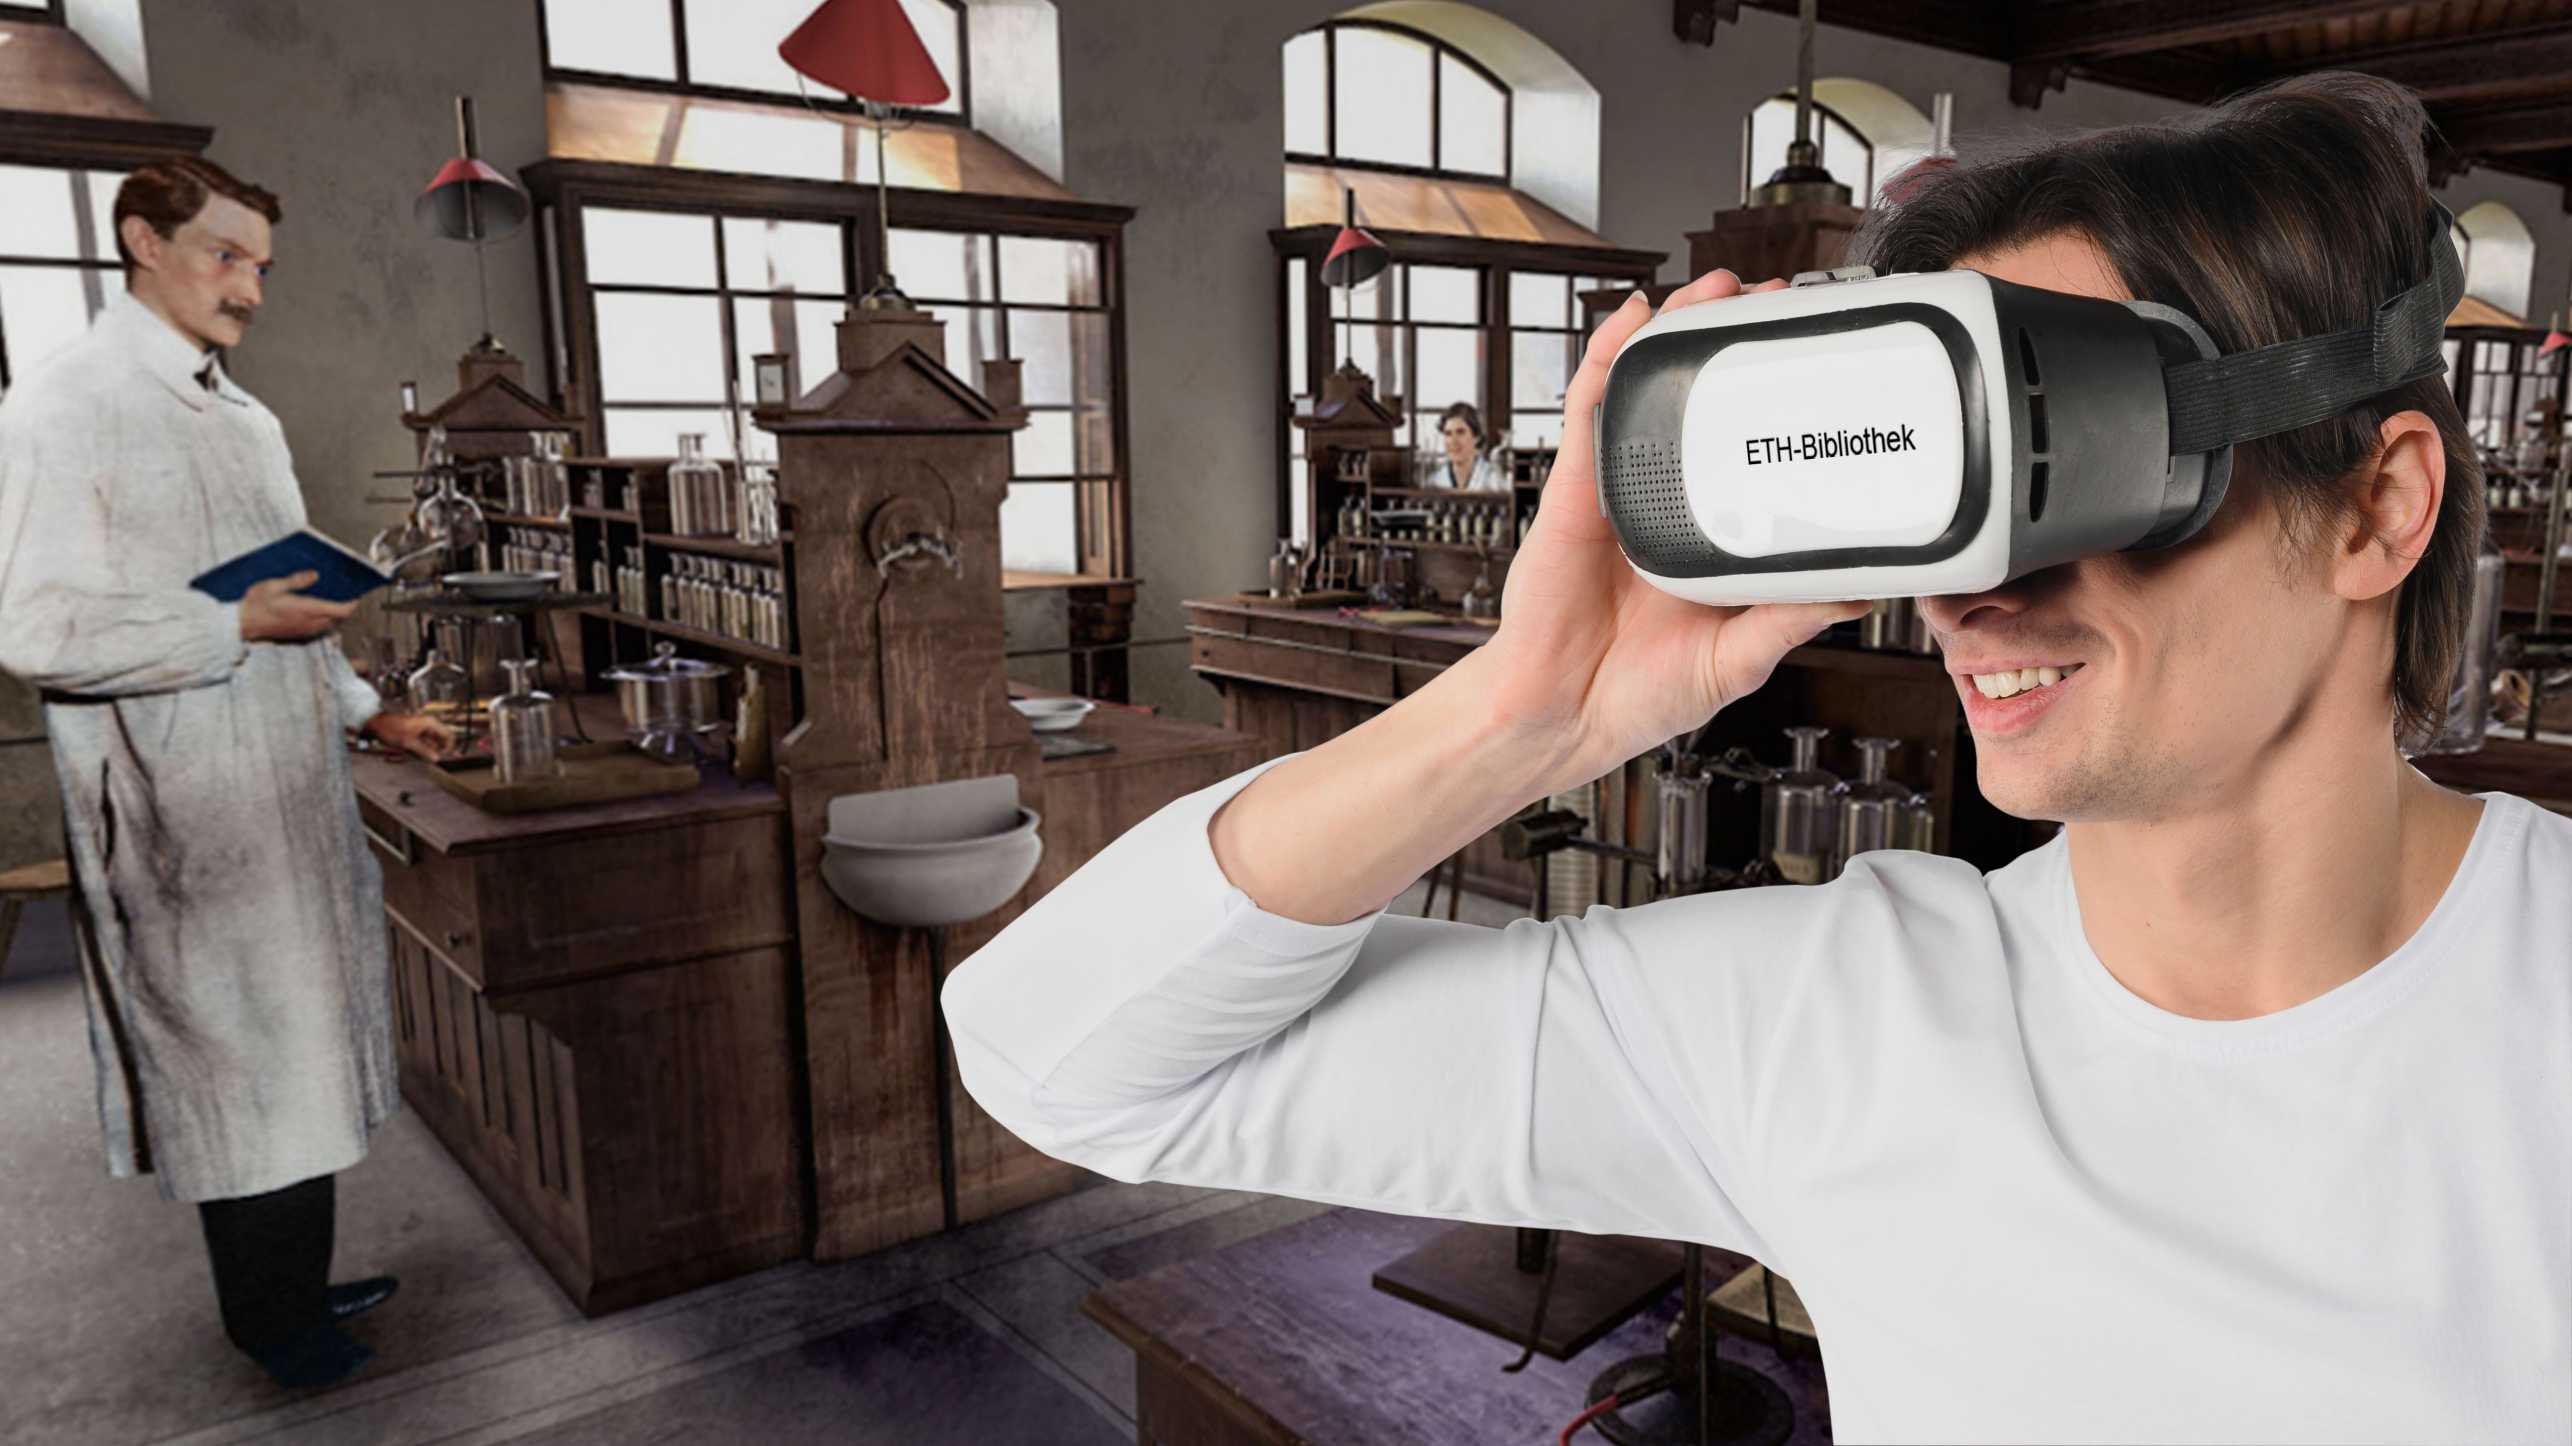 A man with brown hair looks through VR glasses. In the background you can see a historical laboratory with wooden fittings and test tubes.